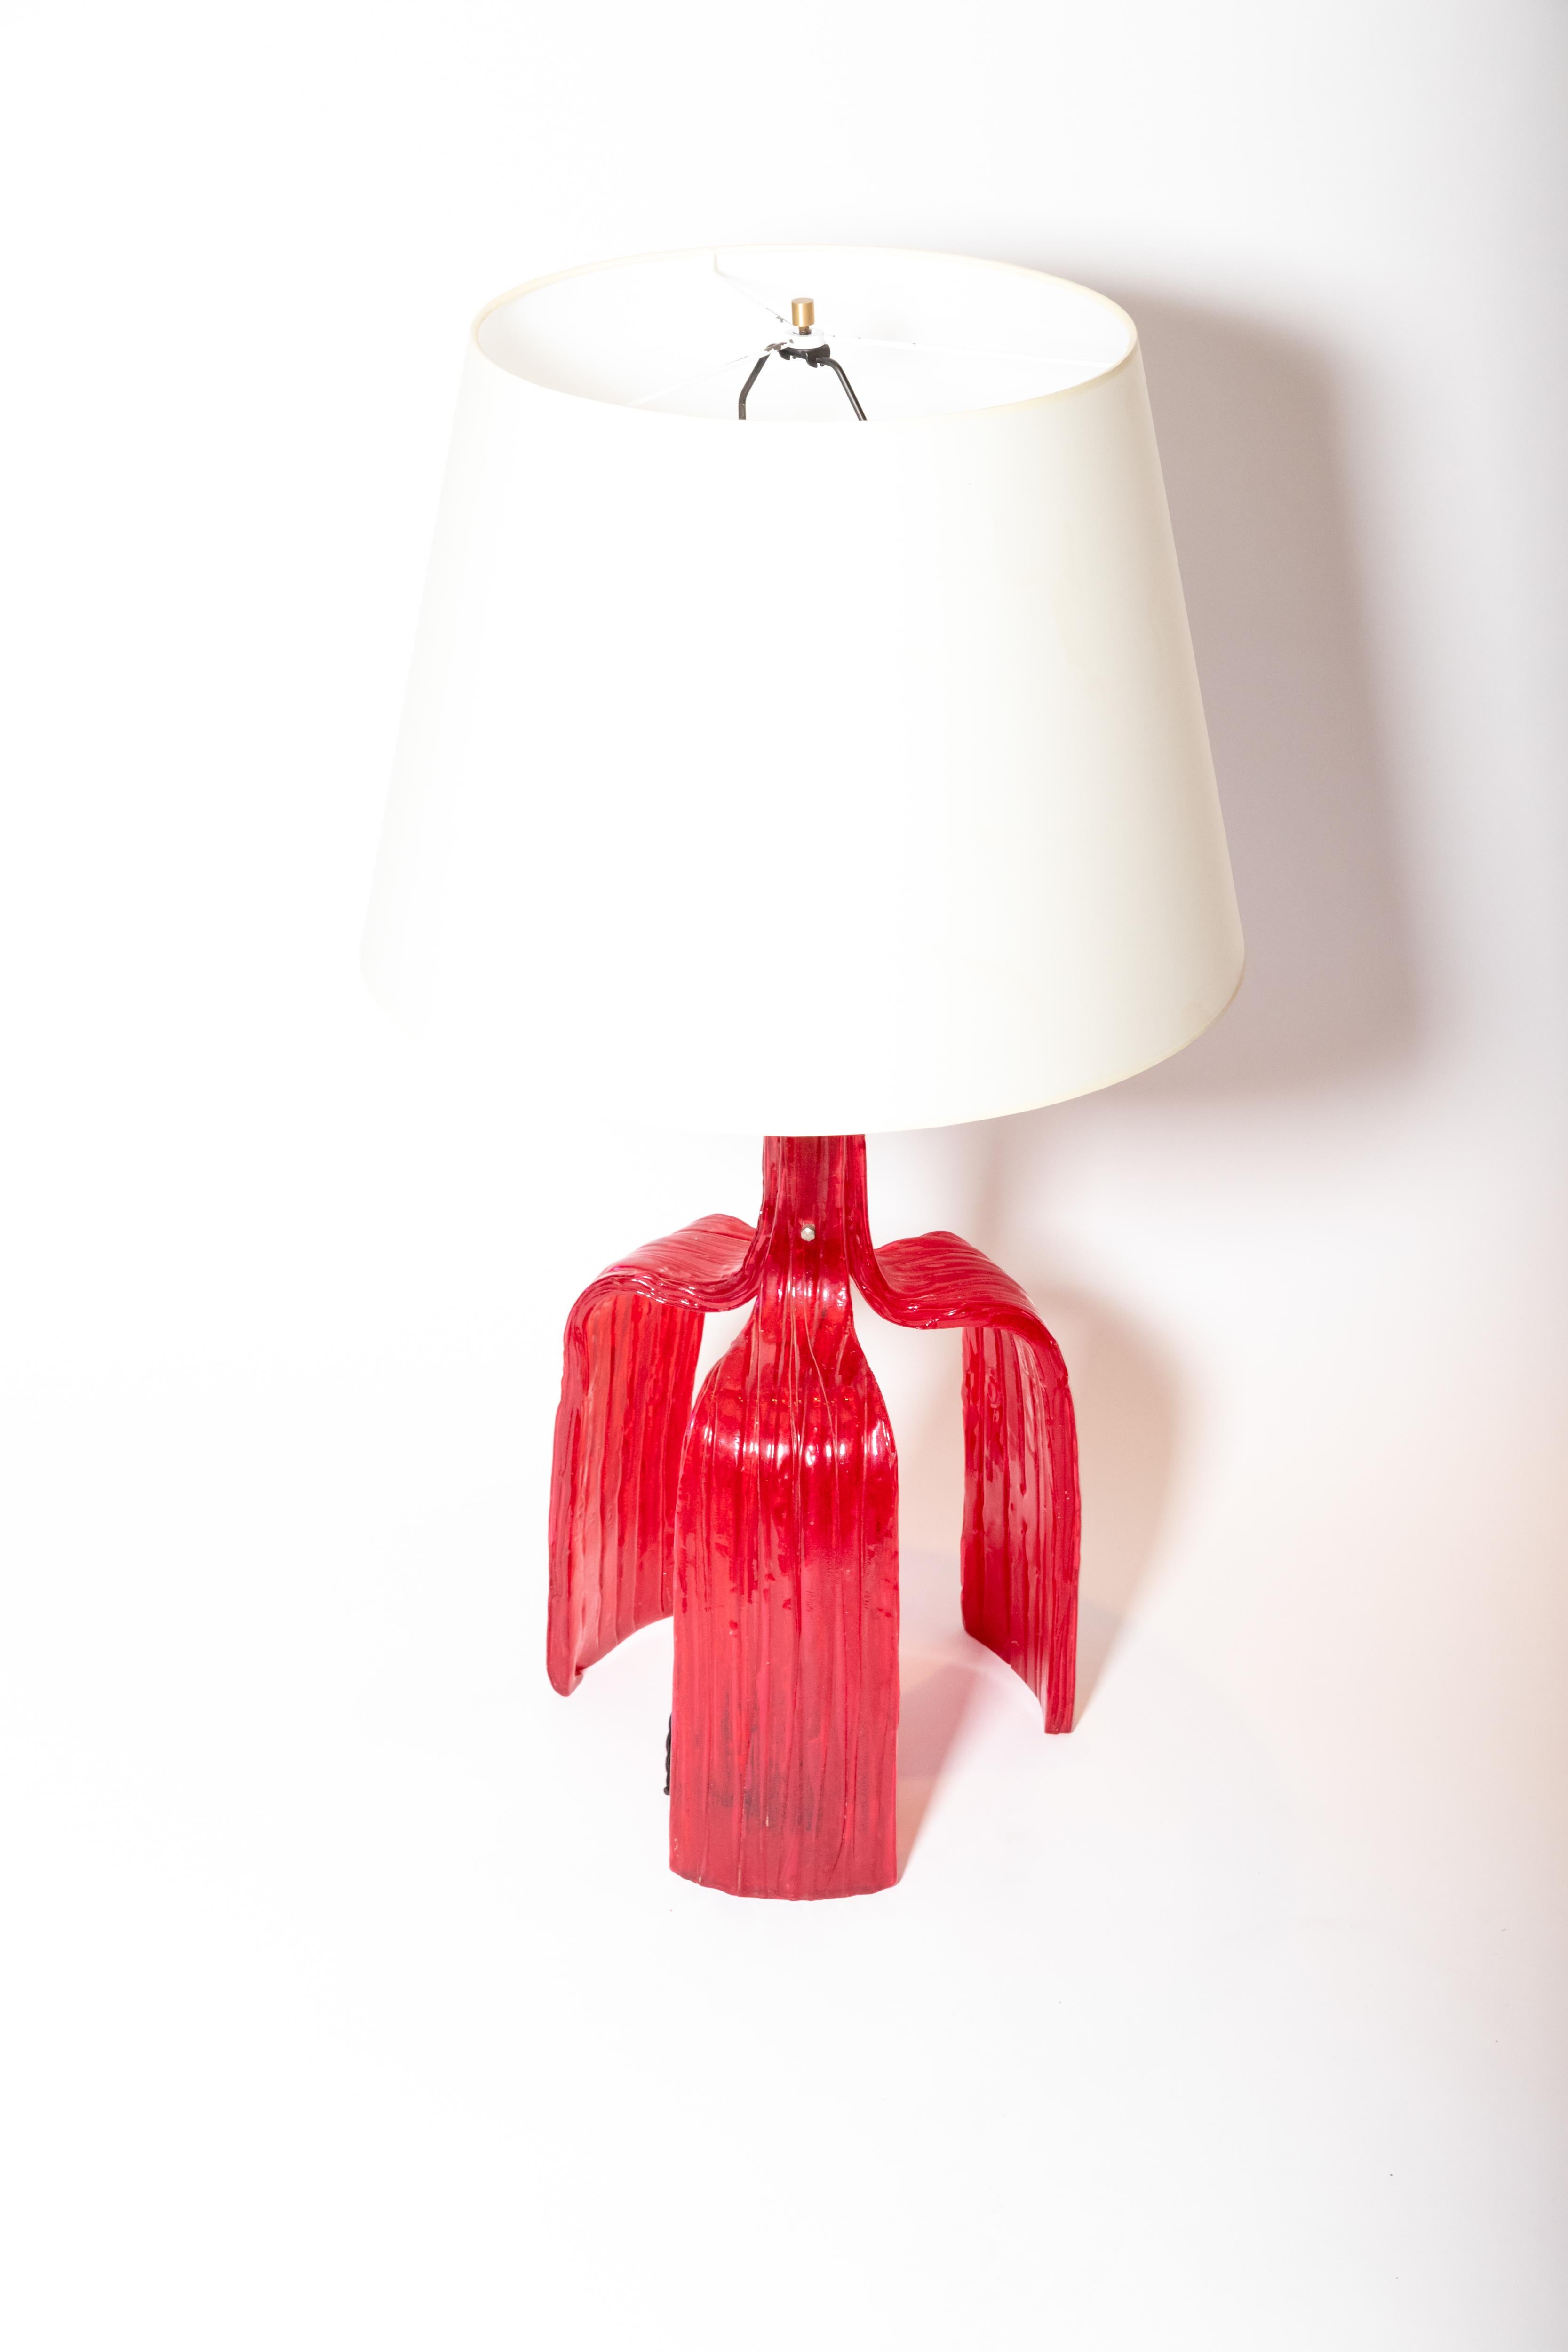 20th Century Vintage French Red Resin Bedside Table Lamp